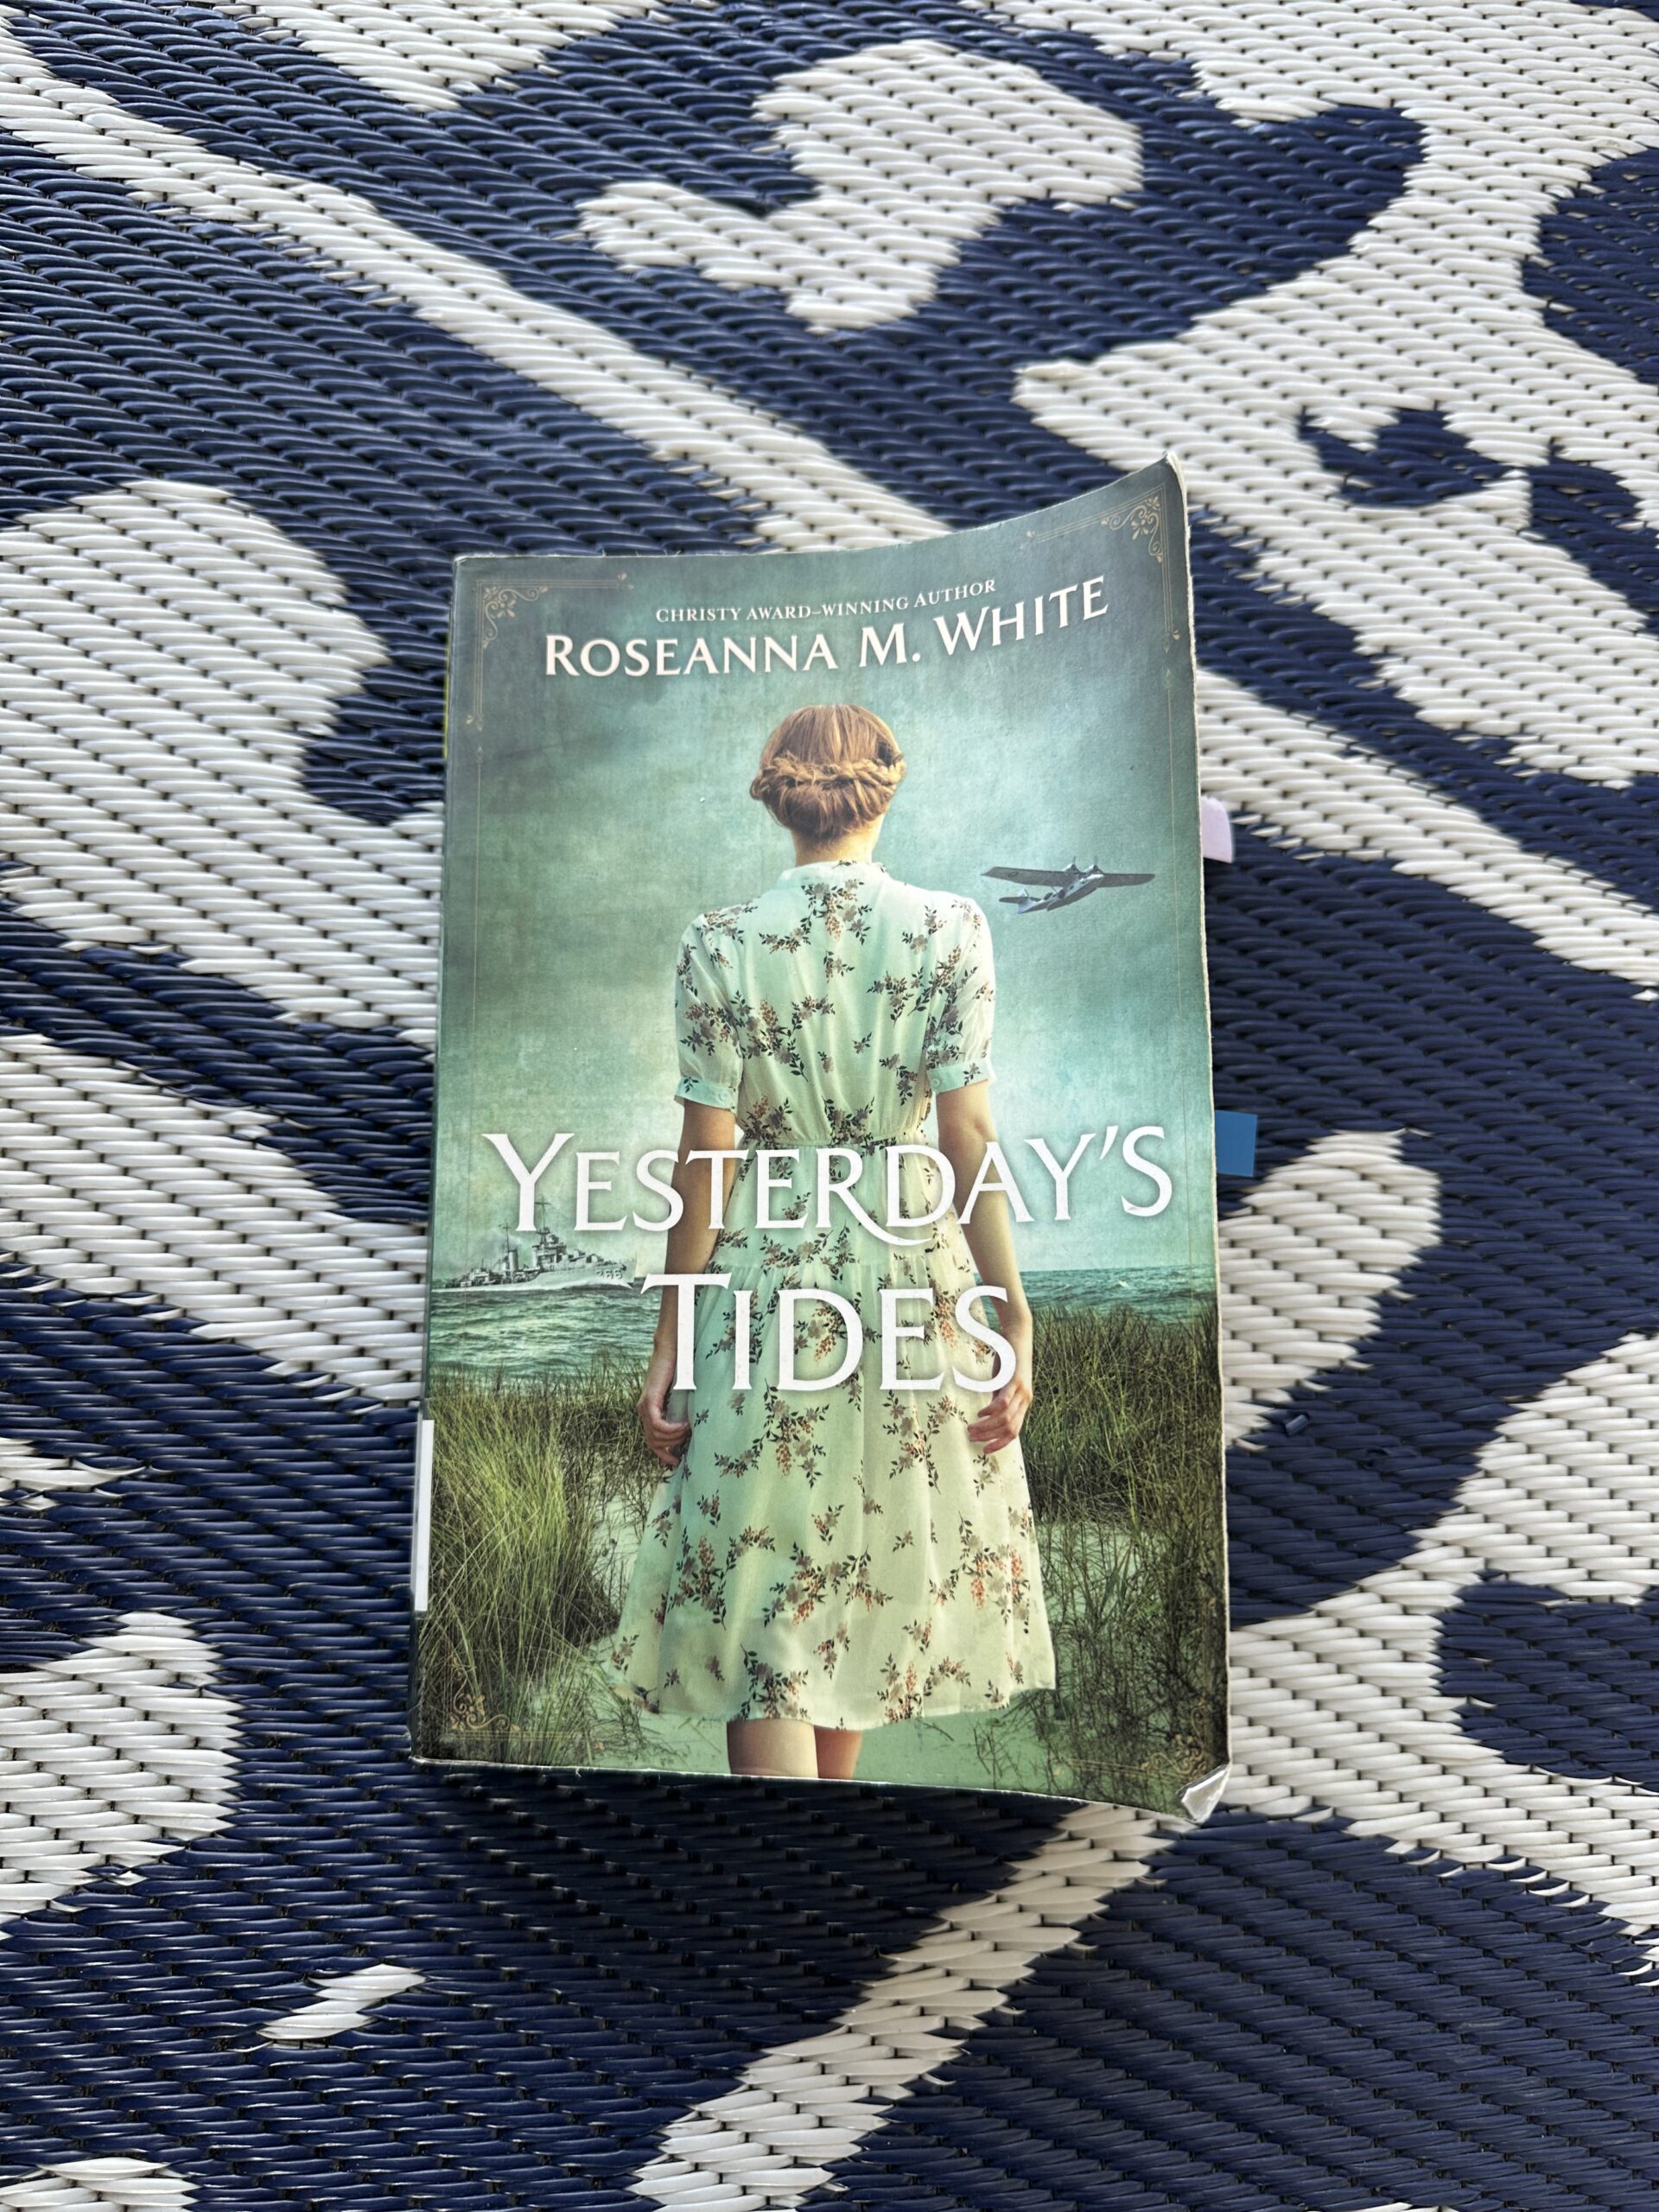 Yesterday’s Tides by Roseanna M. White